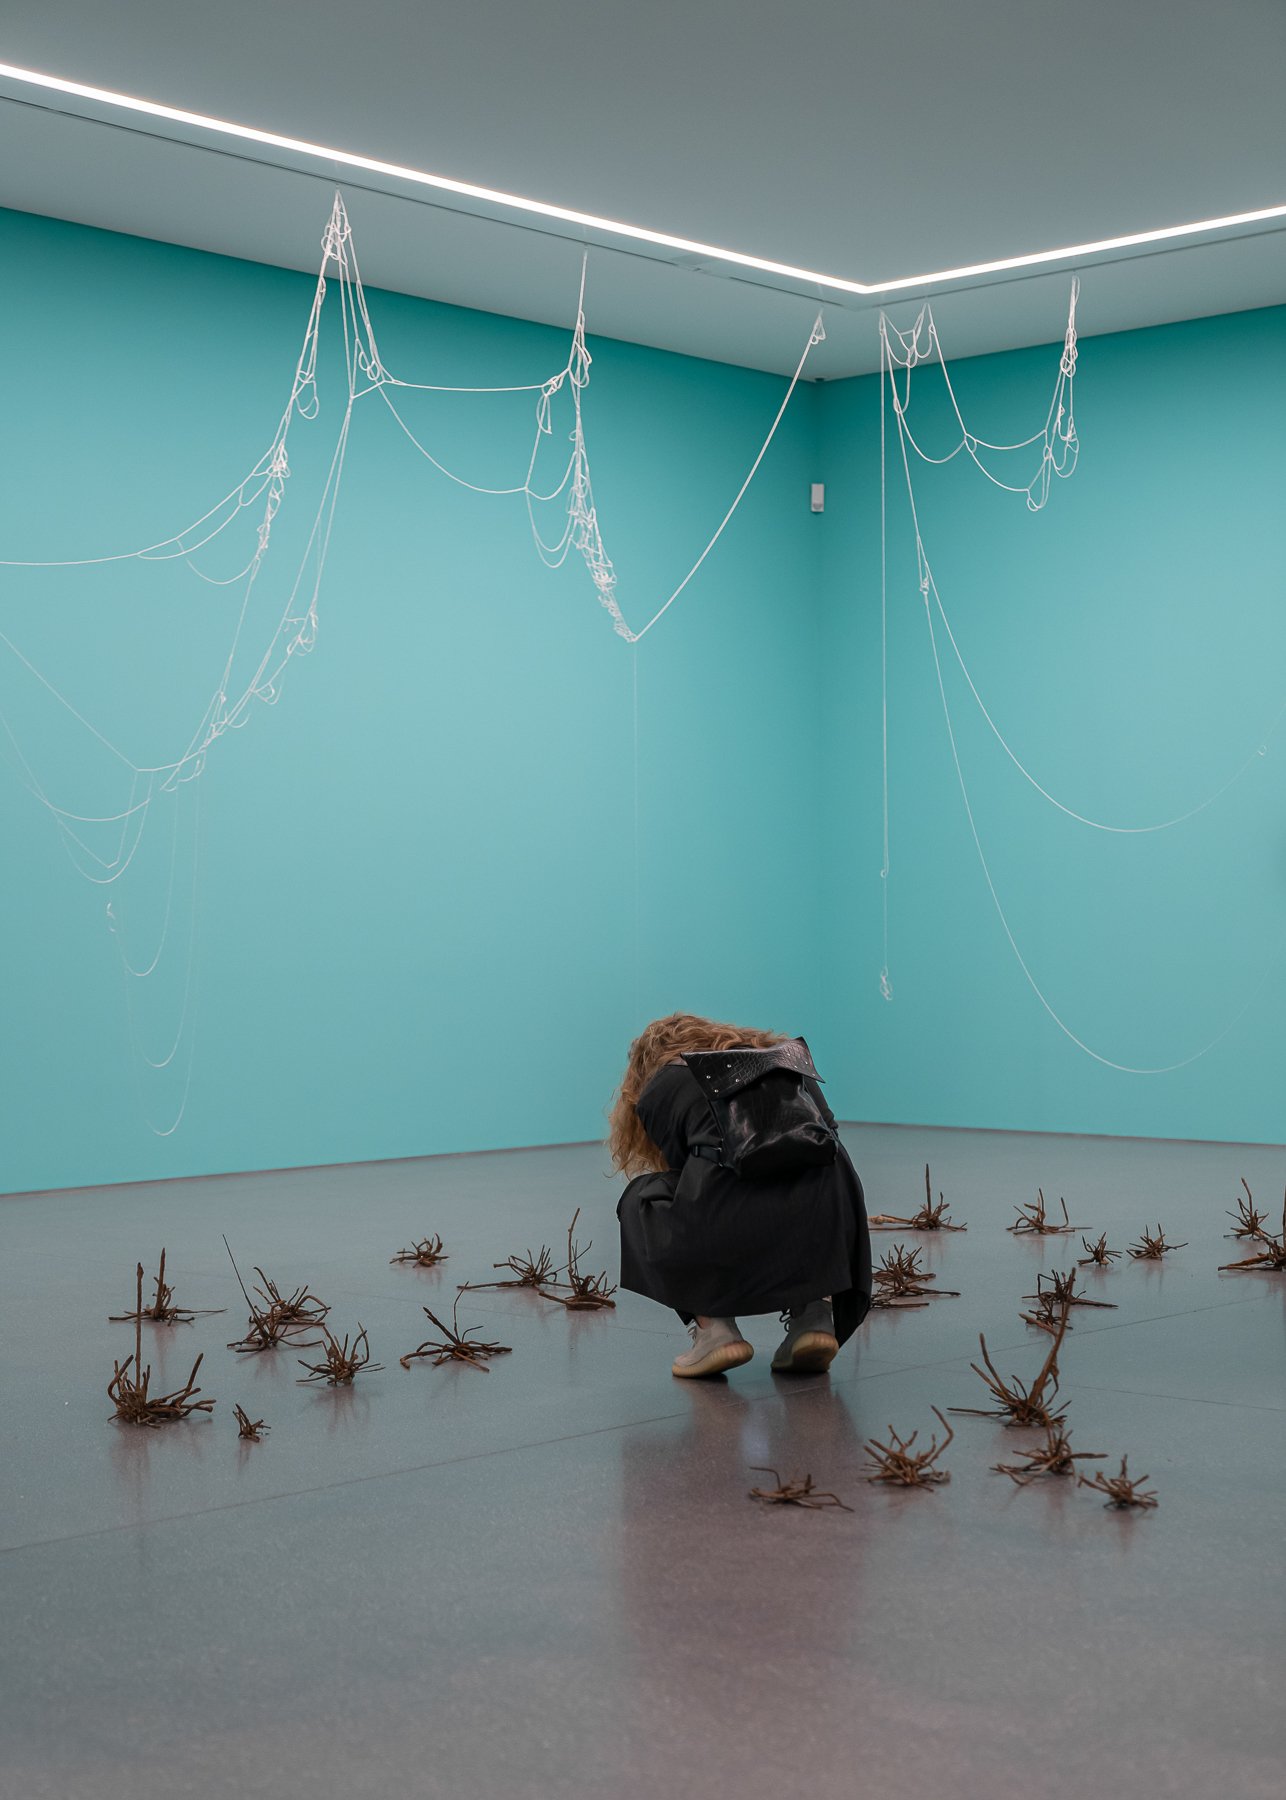  Making Waves   Installation with ‘Atoms of Delight’ (glass beads and nylon thread), ‘Small Fires’(nails and magnets) and wall paint  at Bündner Kunstmuseum, Chur  Fotocredit: Yanik Bürkli, on the picture: Anna Konstantinova 